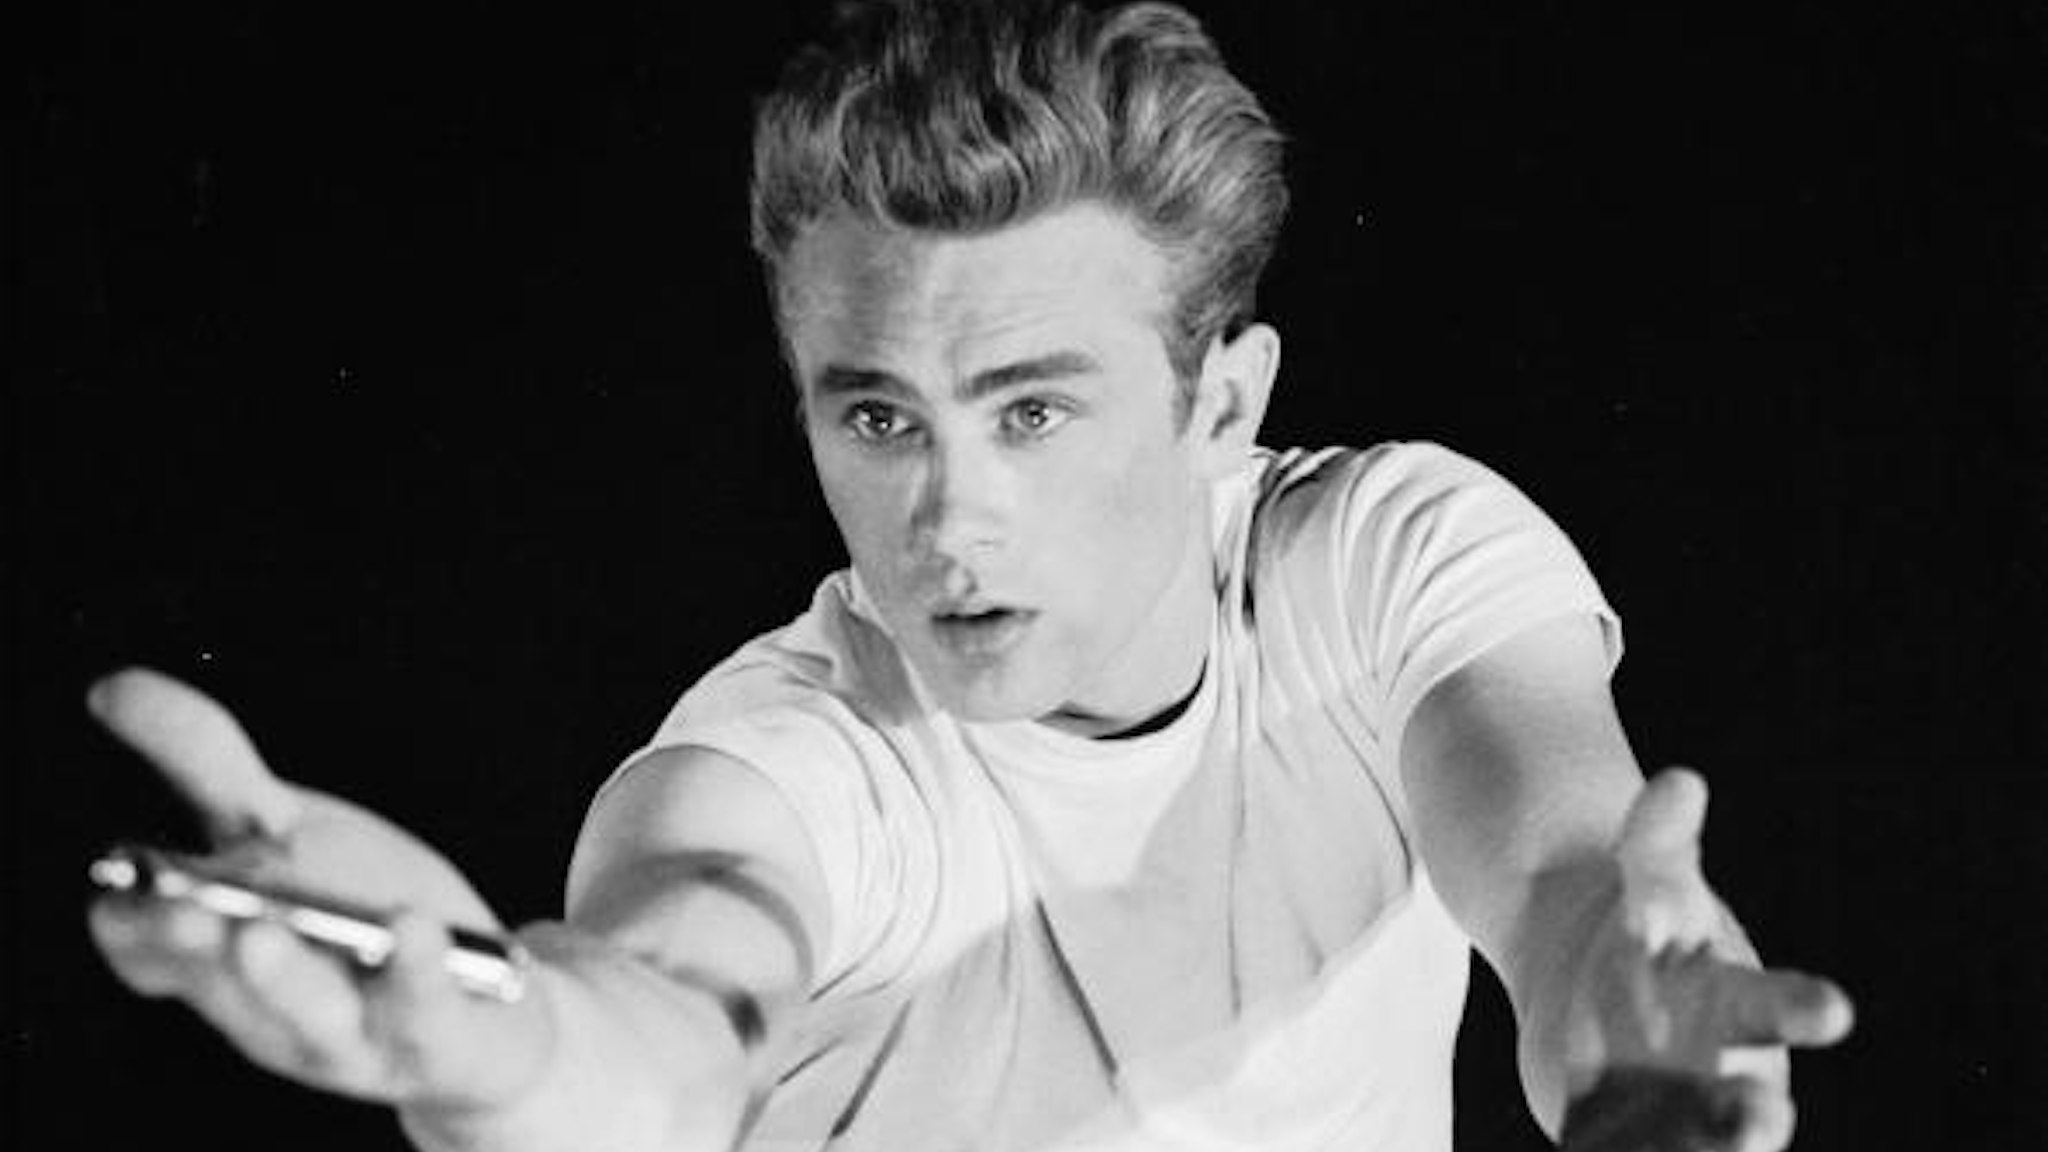 1955: American actor James Dean (1931 - 1955) in an emotional pose.